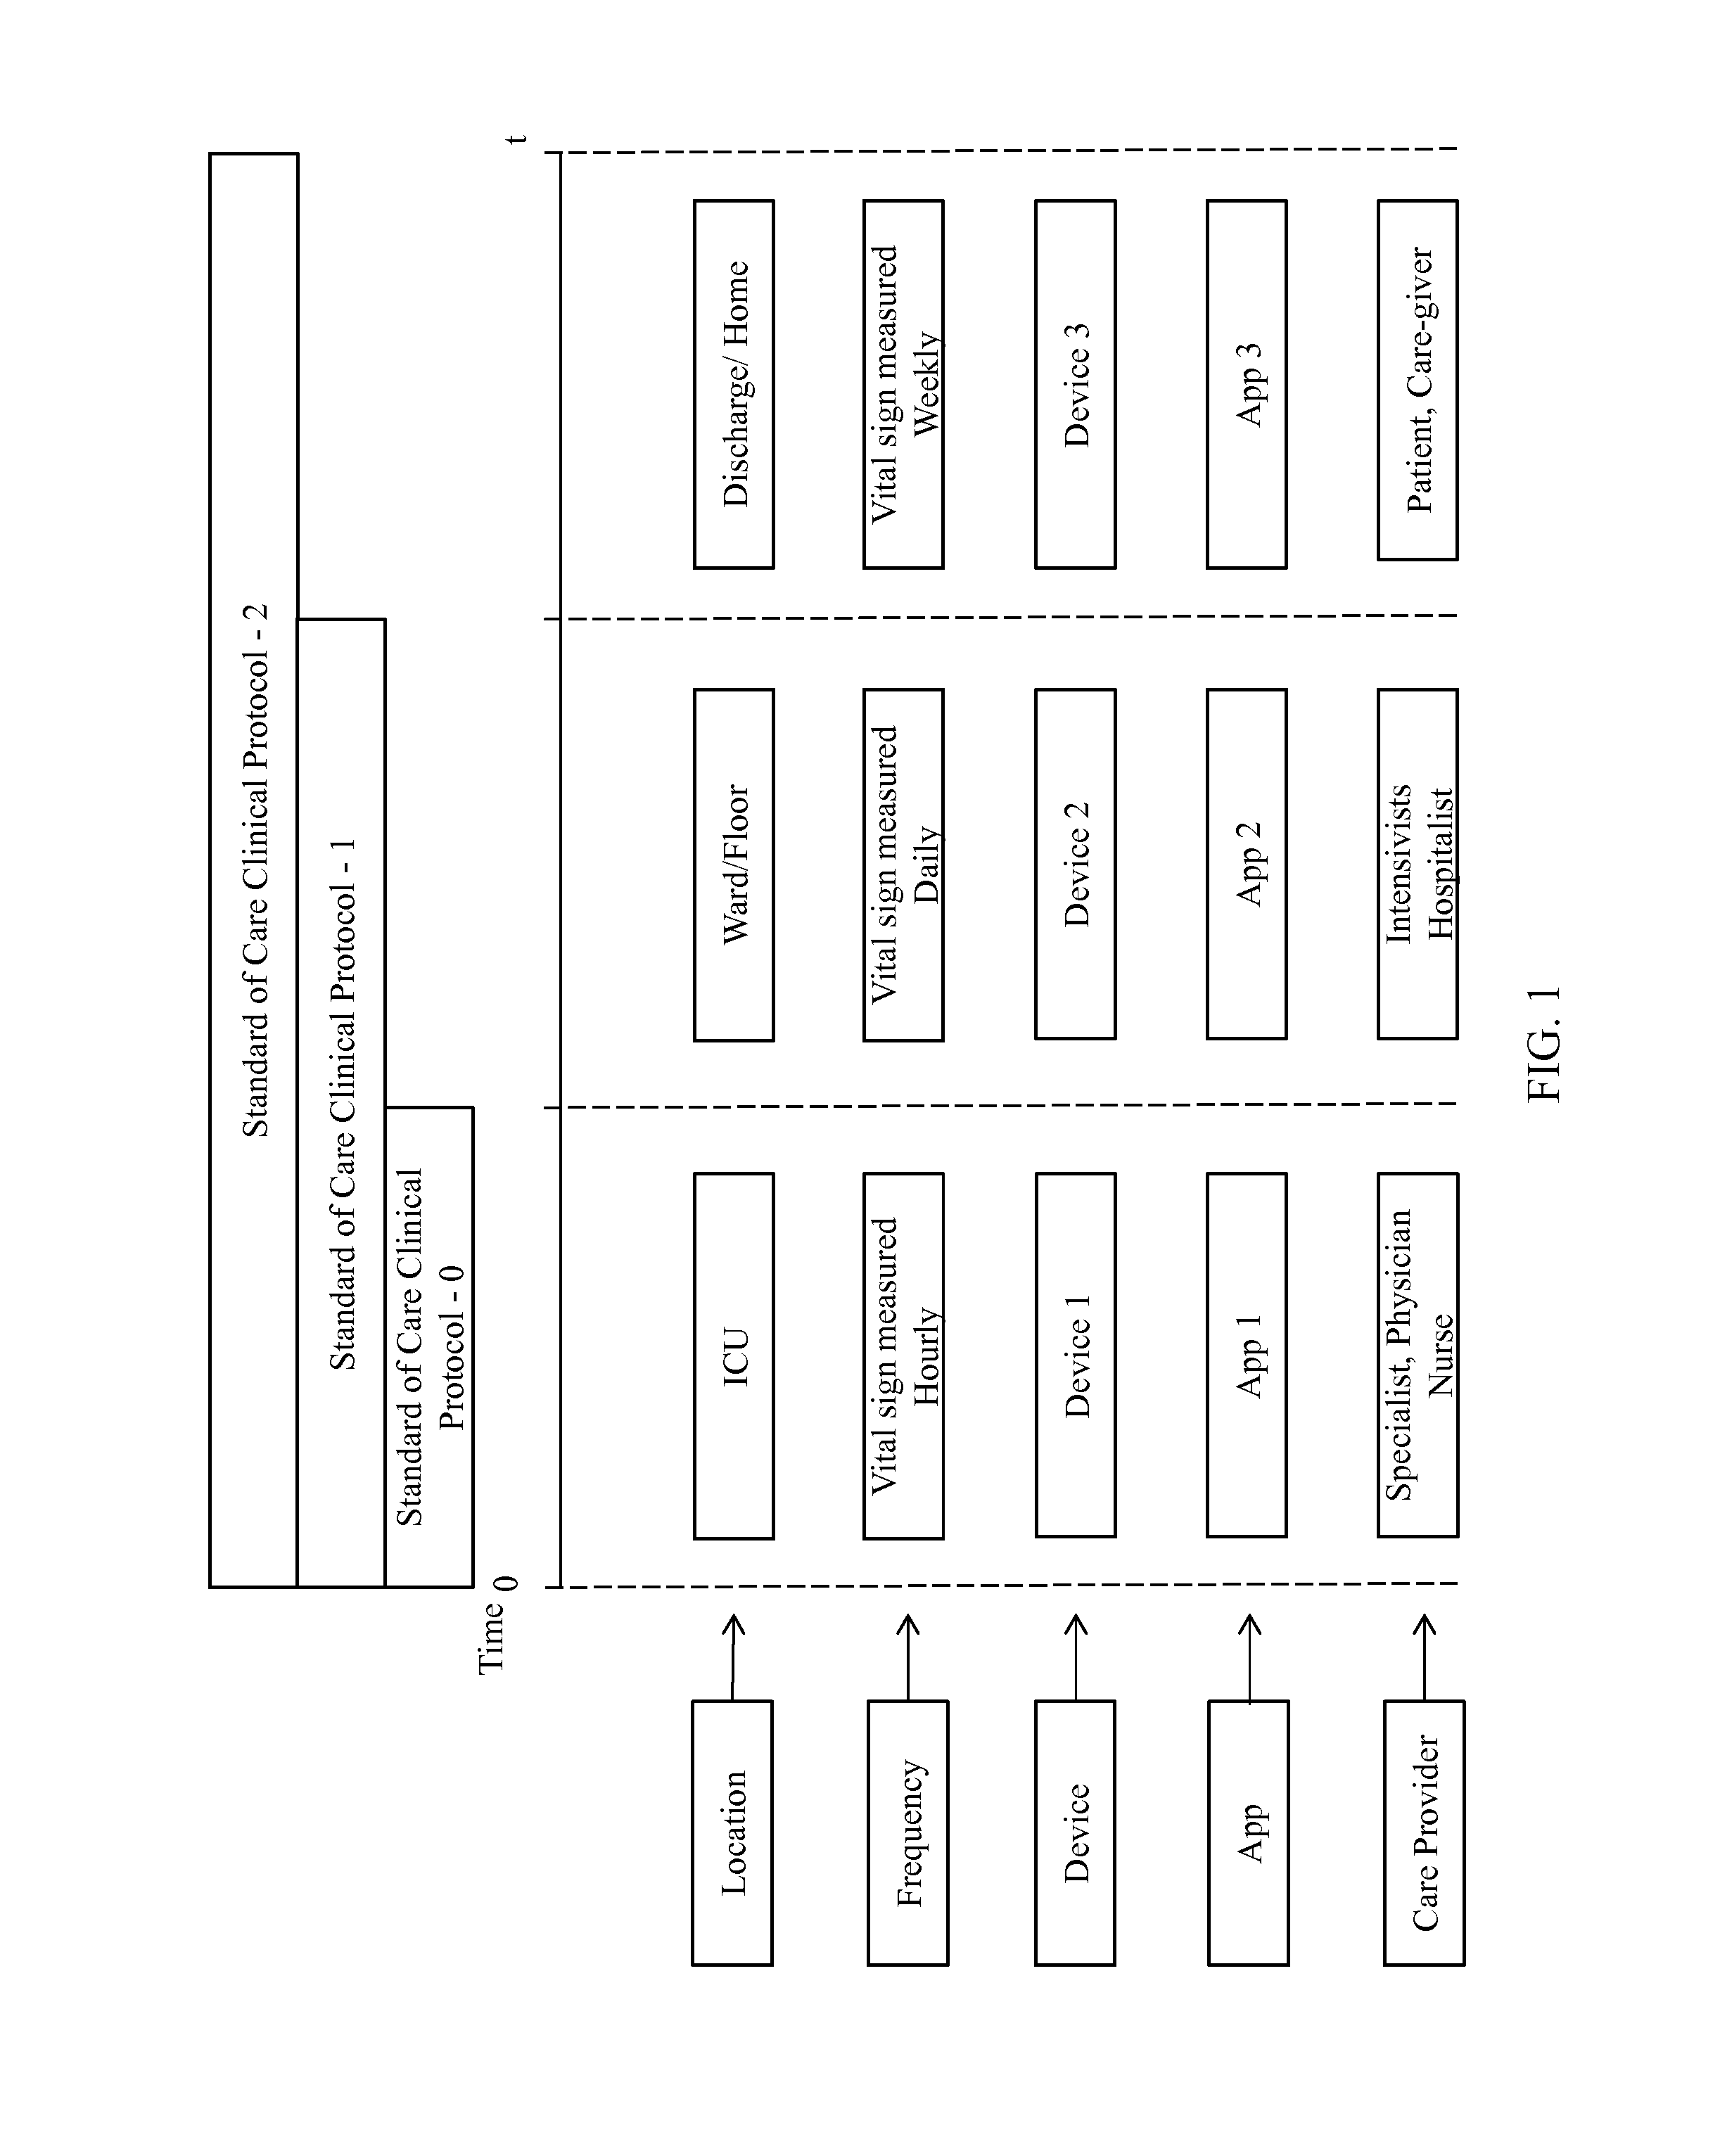 System and method for facilitating delivery of patient-care